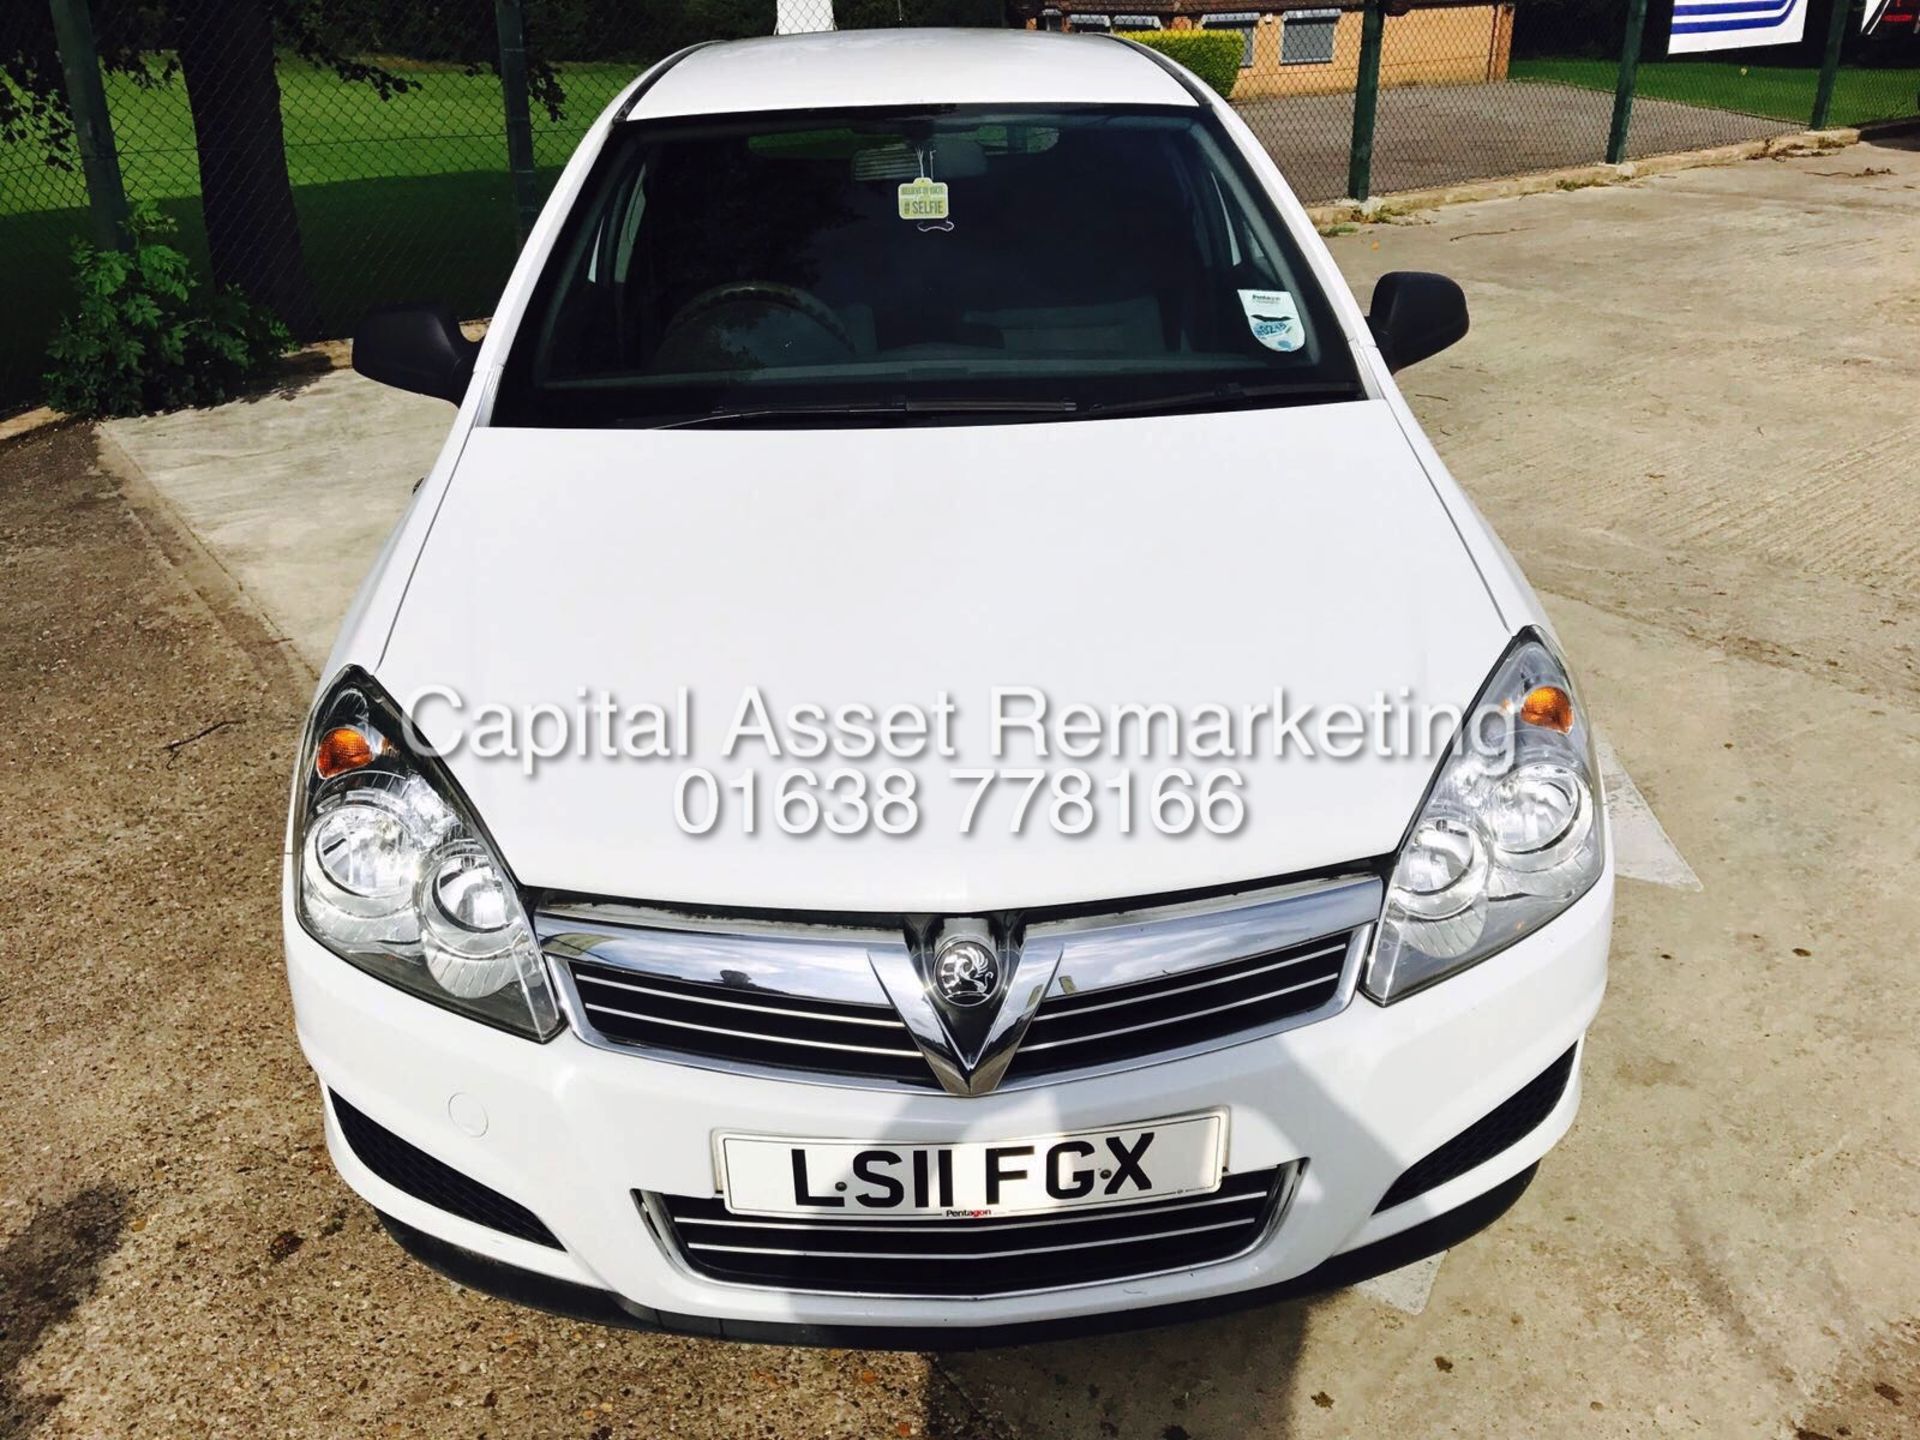 ON SALE VAUXHALL ASTRA 1.7CDTI COMMERCIAL (11 REG) REAR FOLDING SEAT - ELEC PACK - COLOUR CODED - Image 2 of 16